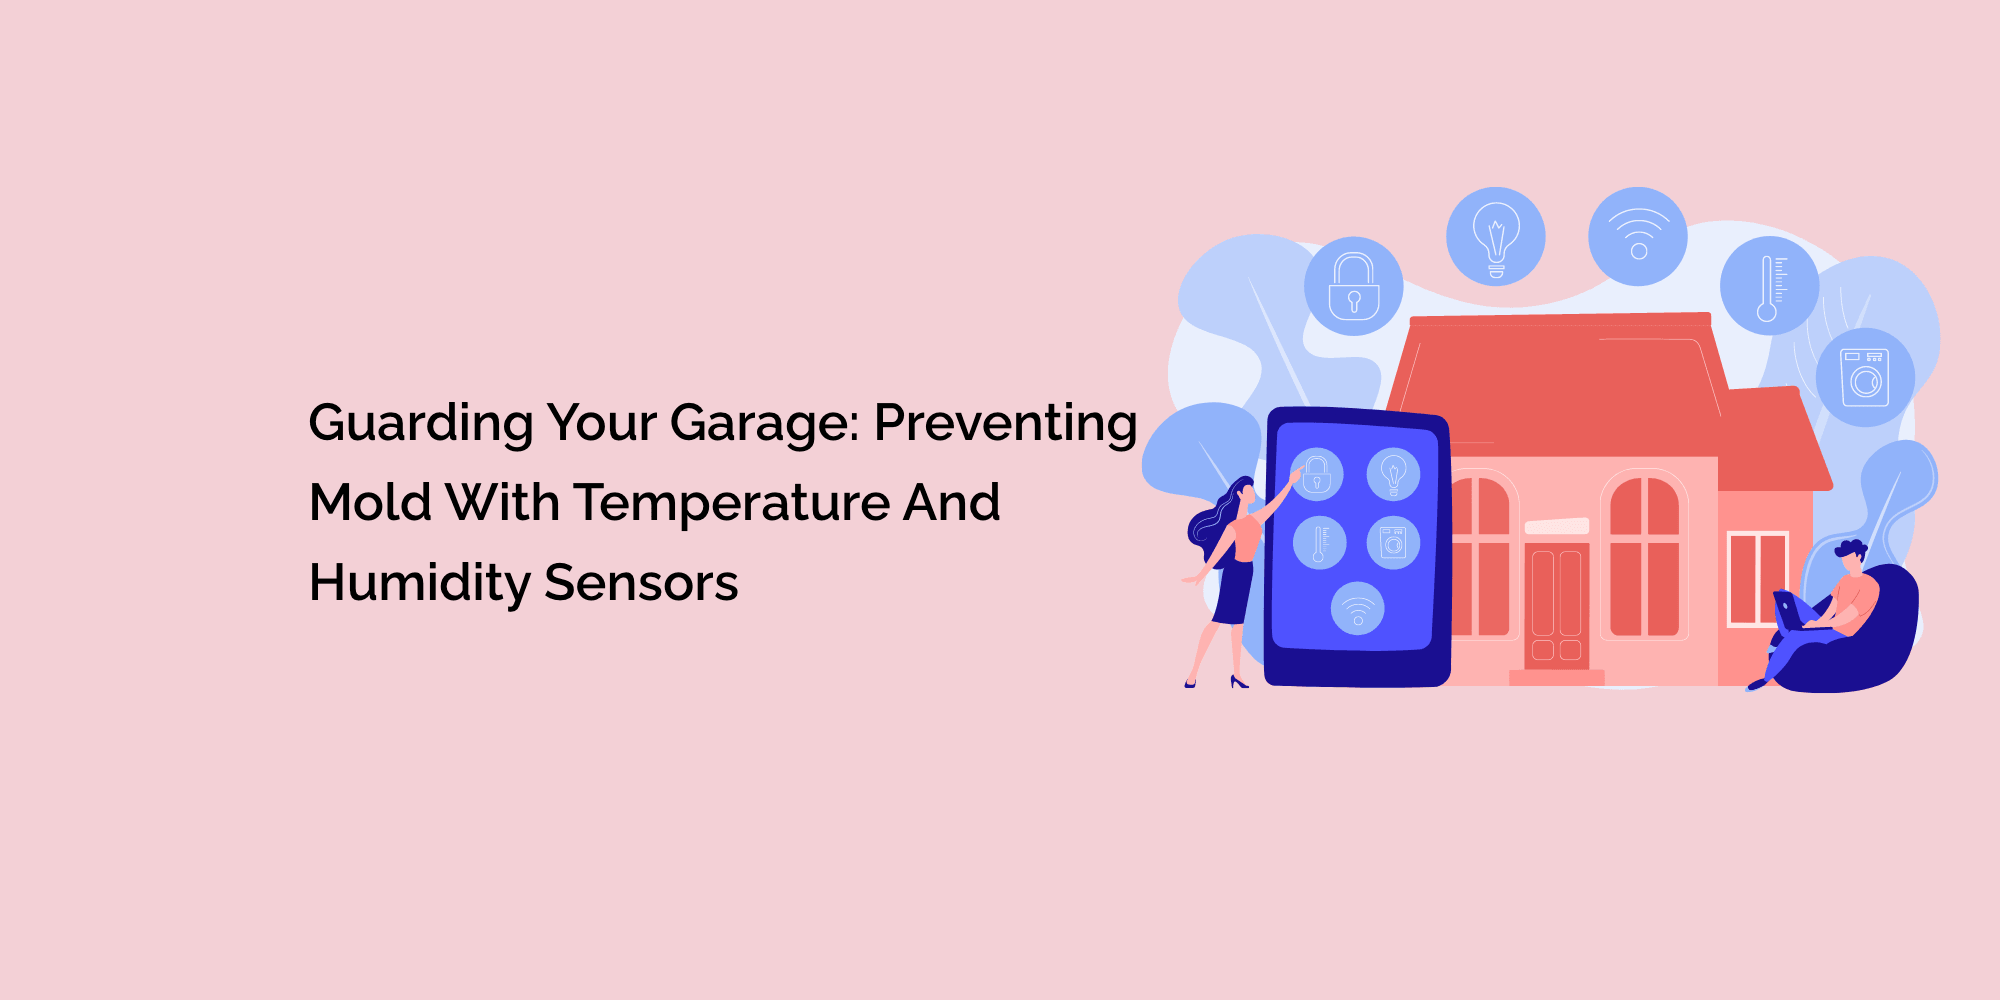 Guarding Your Garage: Preventing Mold with Temperature and Humidity Sensors